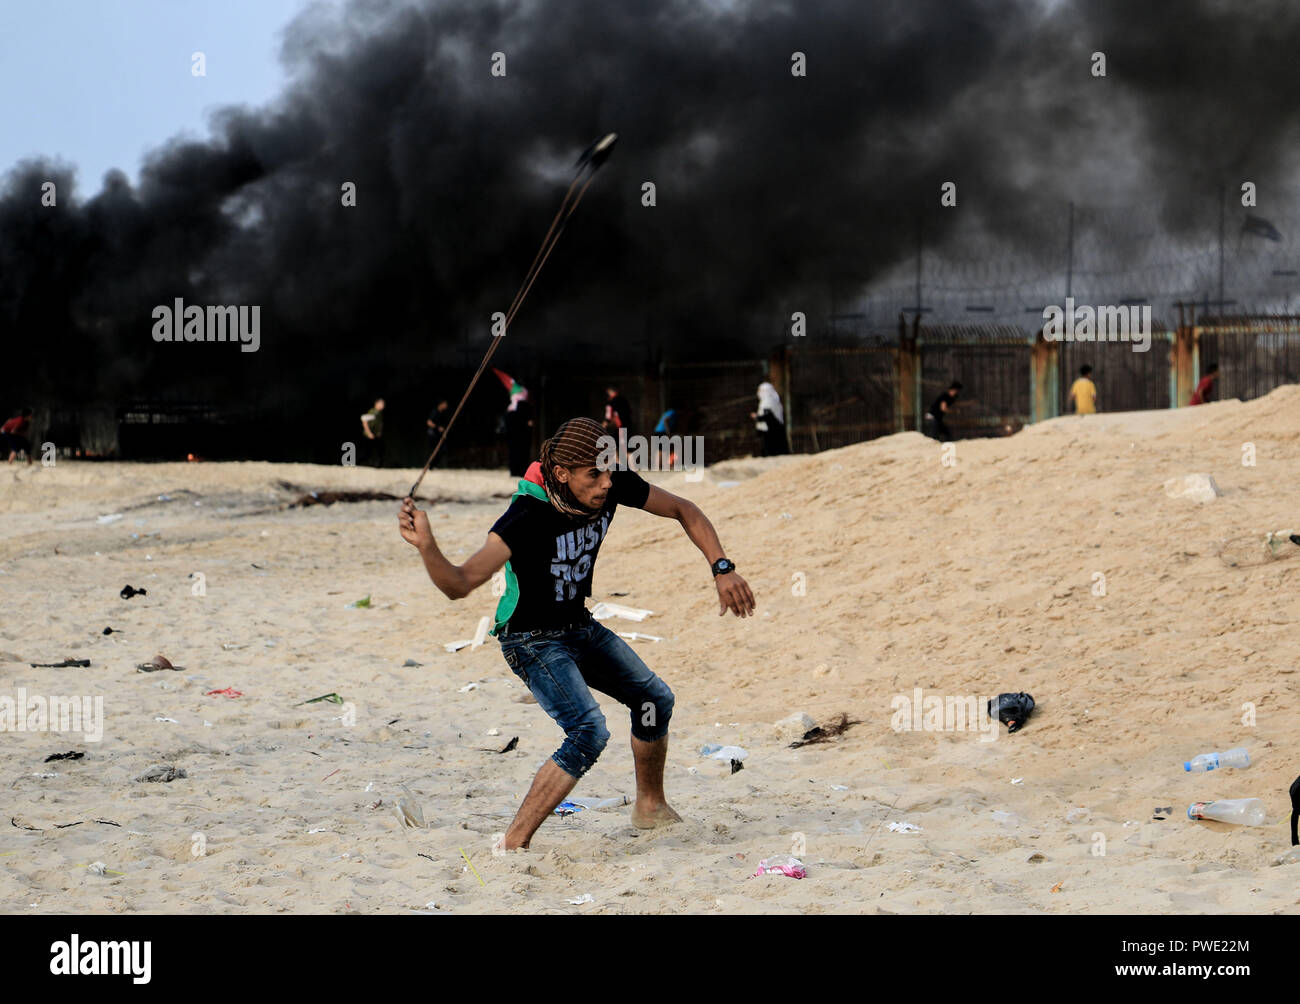 Beit Lahiya, The Gaza Strip, Palestine. 15th Oct, 2018. A Palestinian protestor throw a stone at Israeli troops during a demonstration northern the Gaza strip on the beach of Beit Lahiya. Credit: Mahmoud Khattab/Quds Net News/ZUMA Wire/Alamy Live News Stock Photo